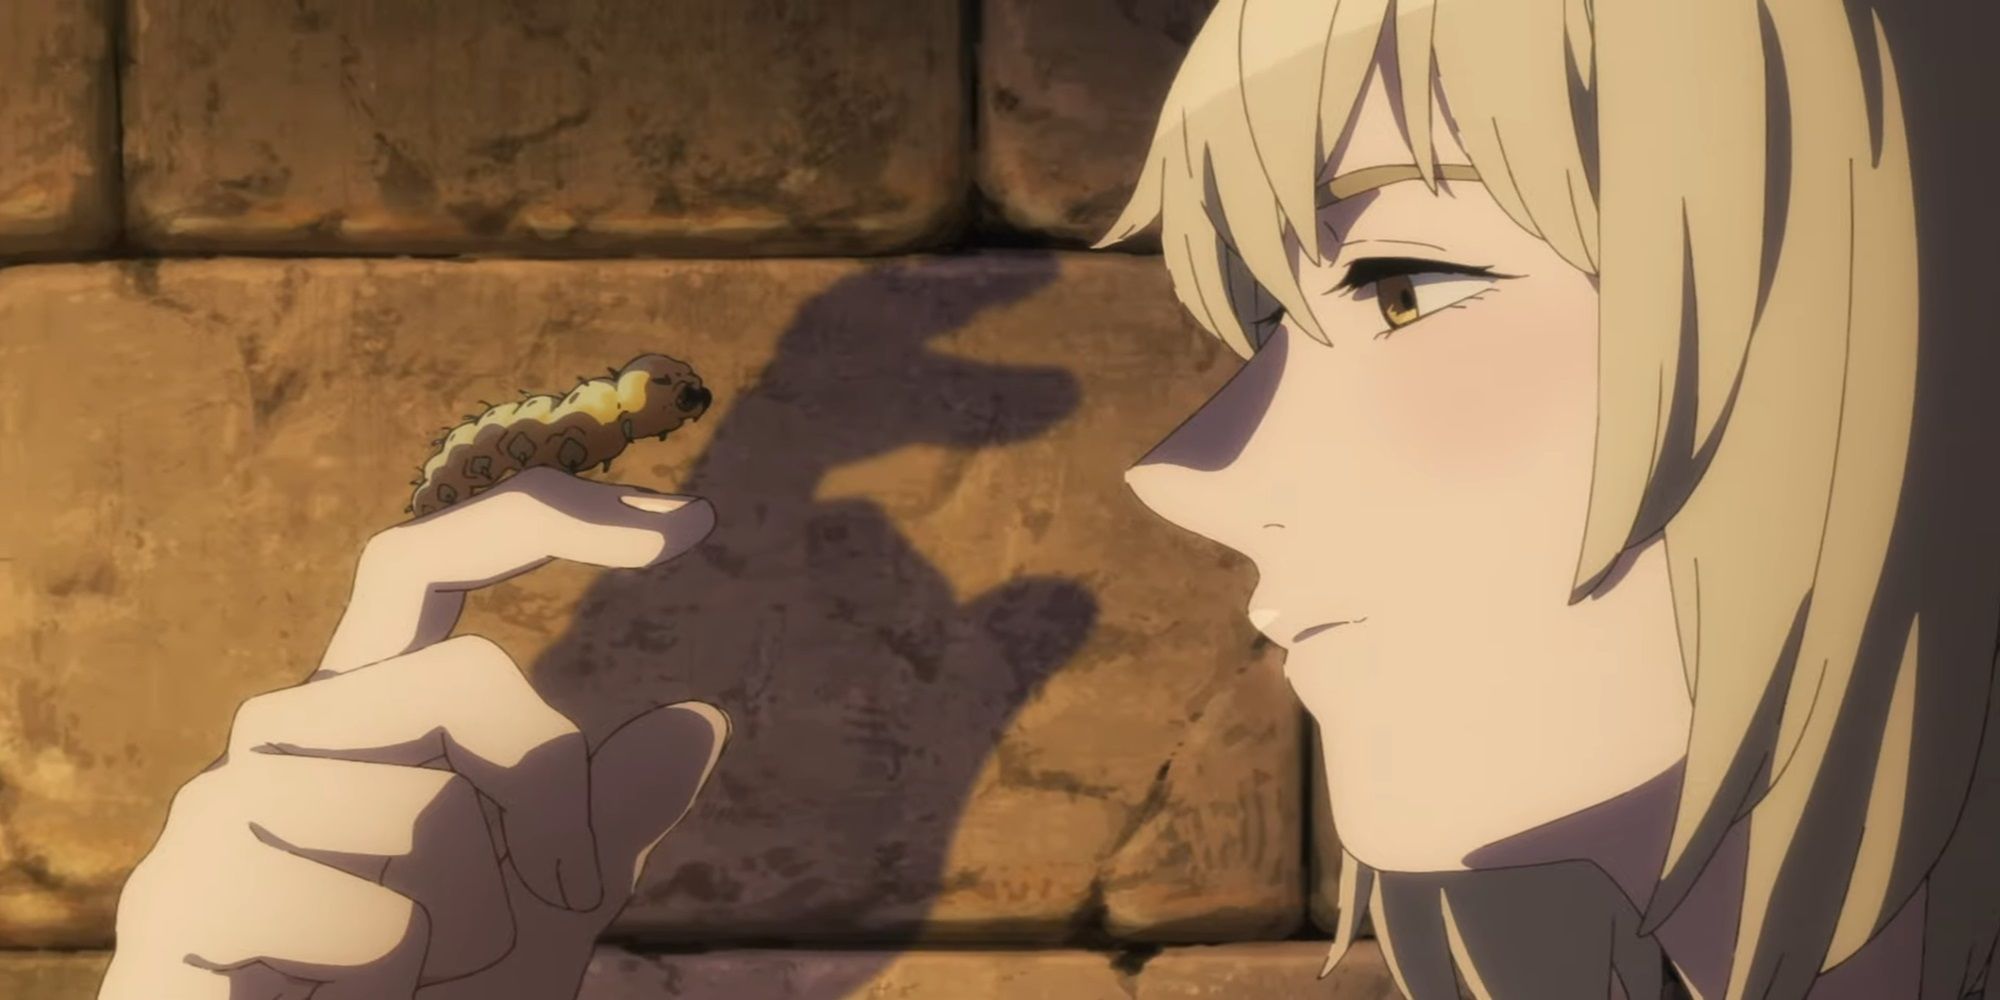 Delicious In Dungeon Trailer screencap of Falin holding a small bug on her hand.